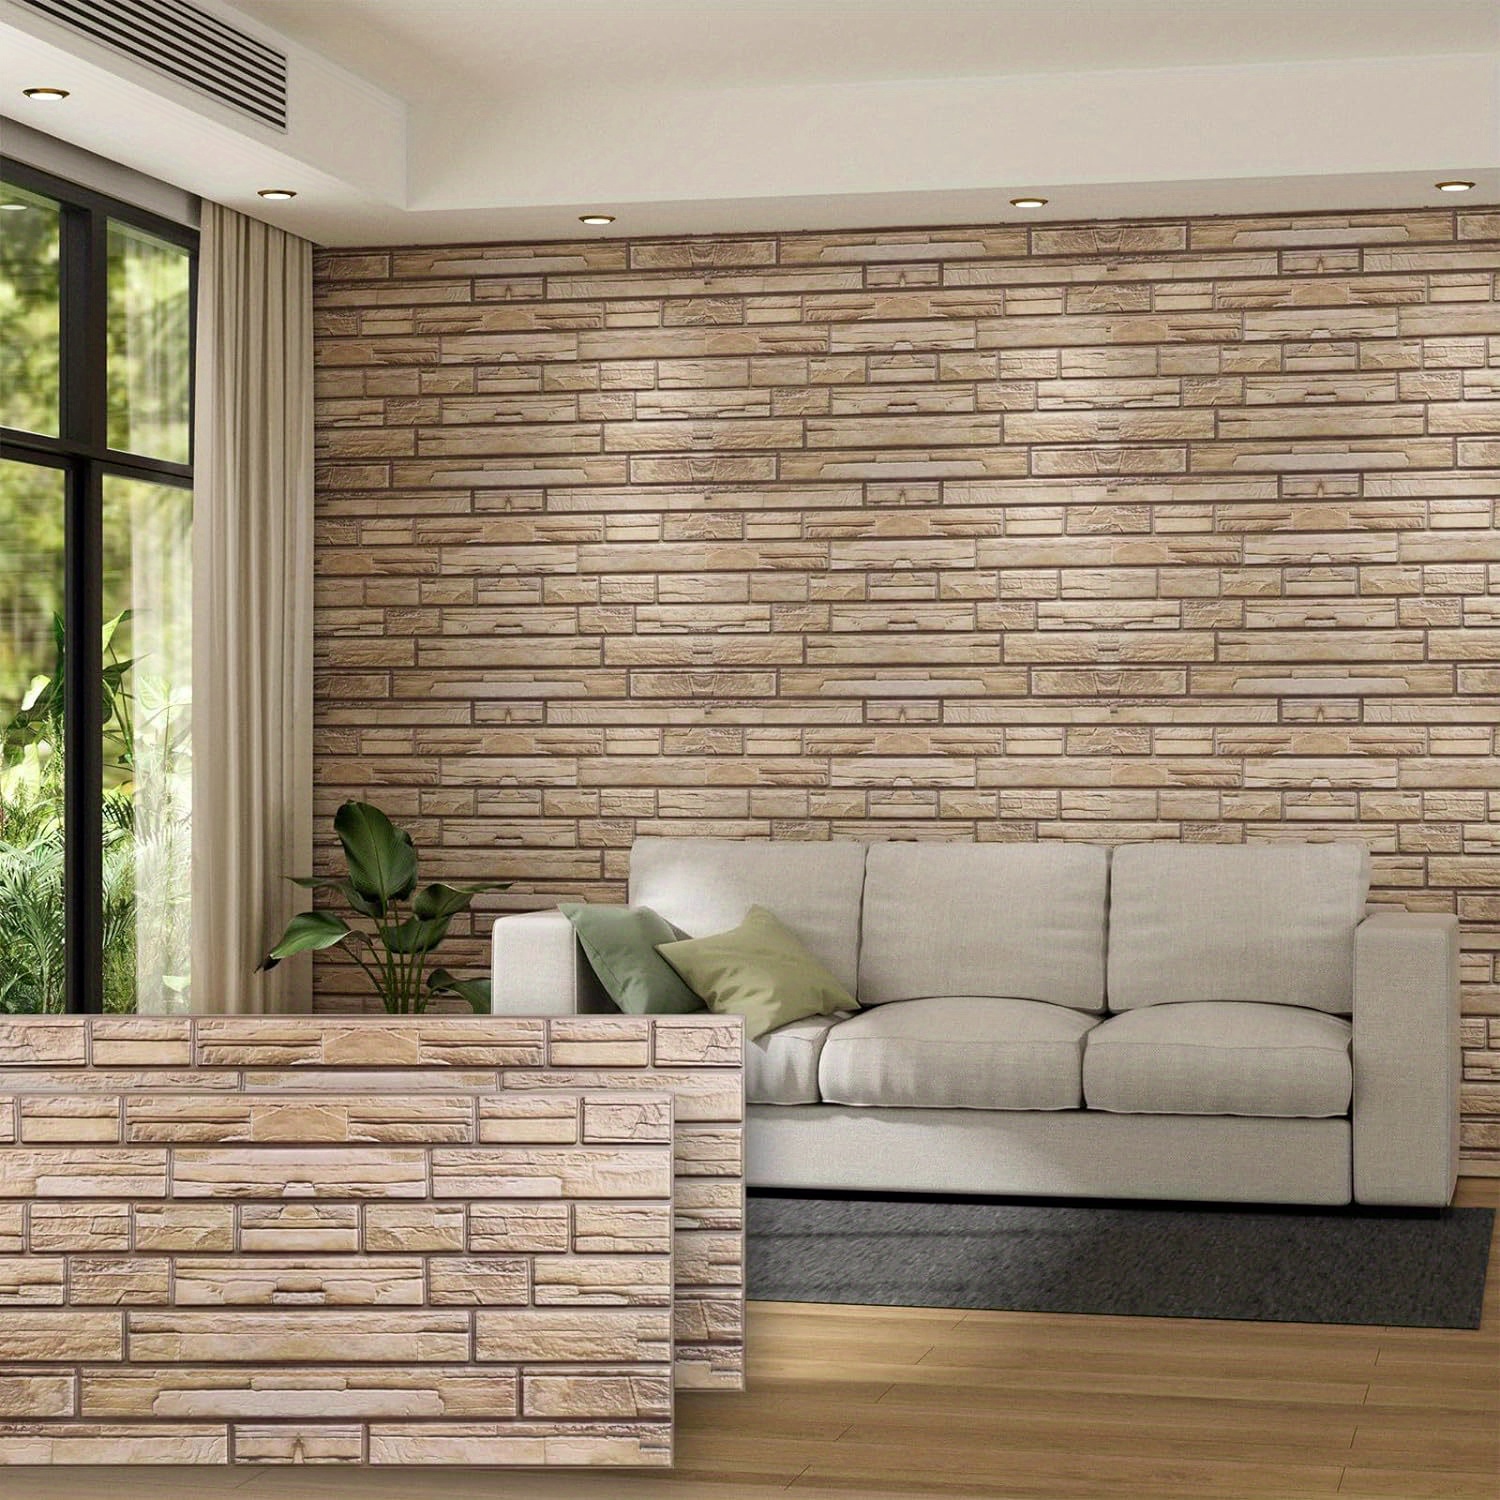 

3d Wall Panels, 38" X 19" Brick Wall Panels Peel And Stick 3d Brick Wallpaper, Self Adhesive Pvc Faux Brick Paneling For Bedroom, Bathroom, Kitchen, Fireplace